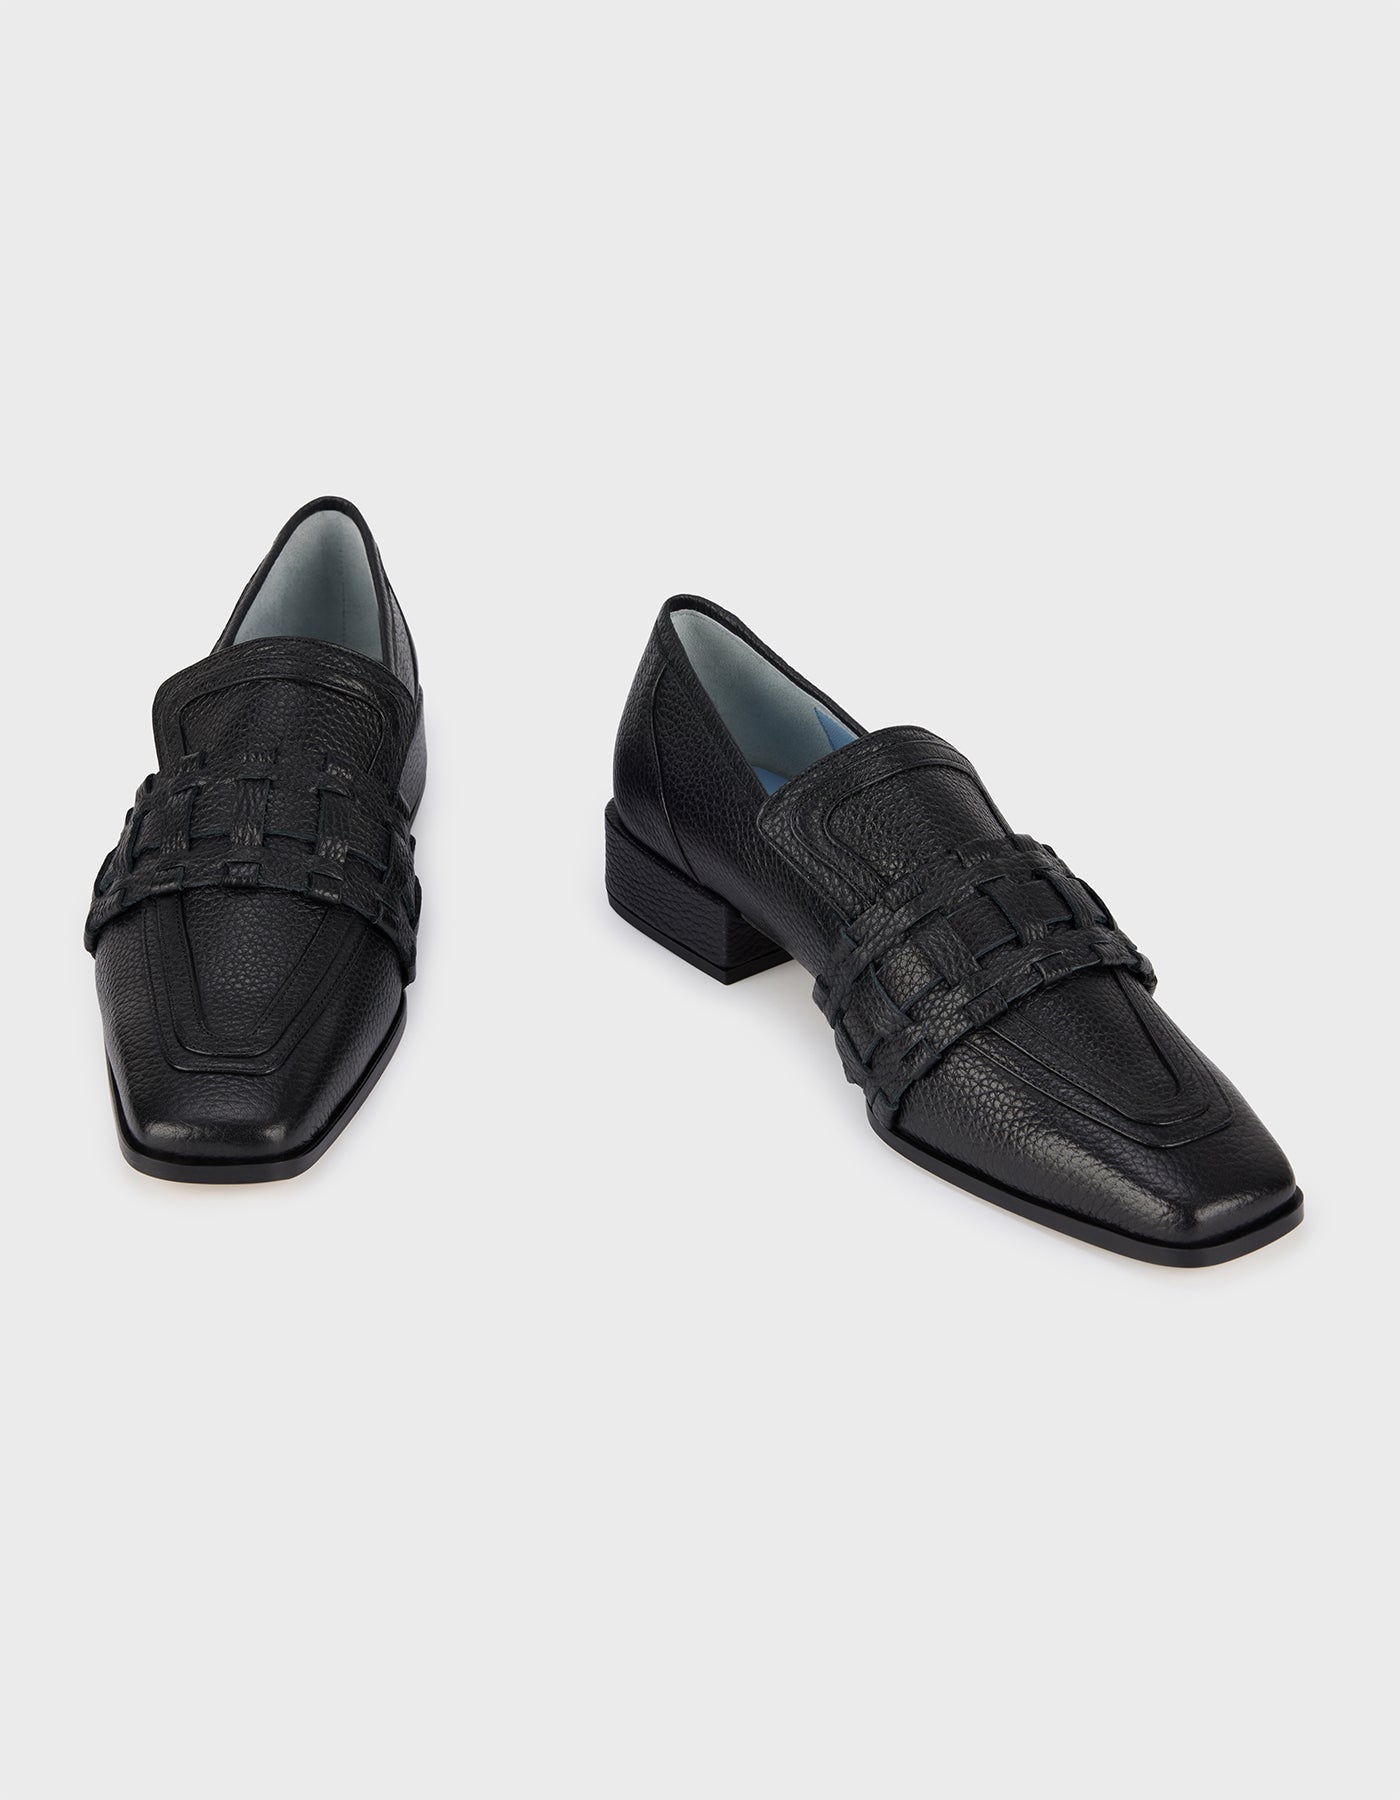 Lora Loafers